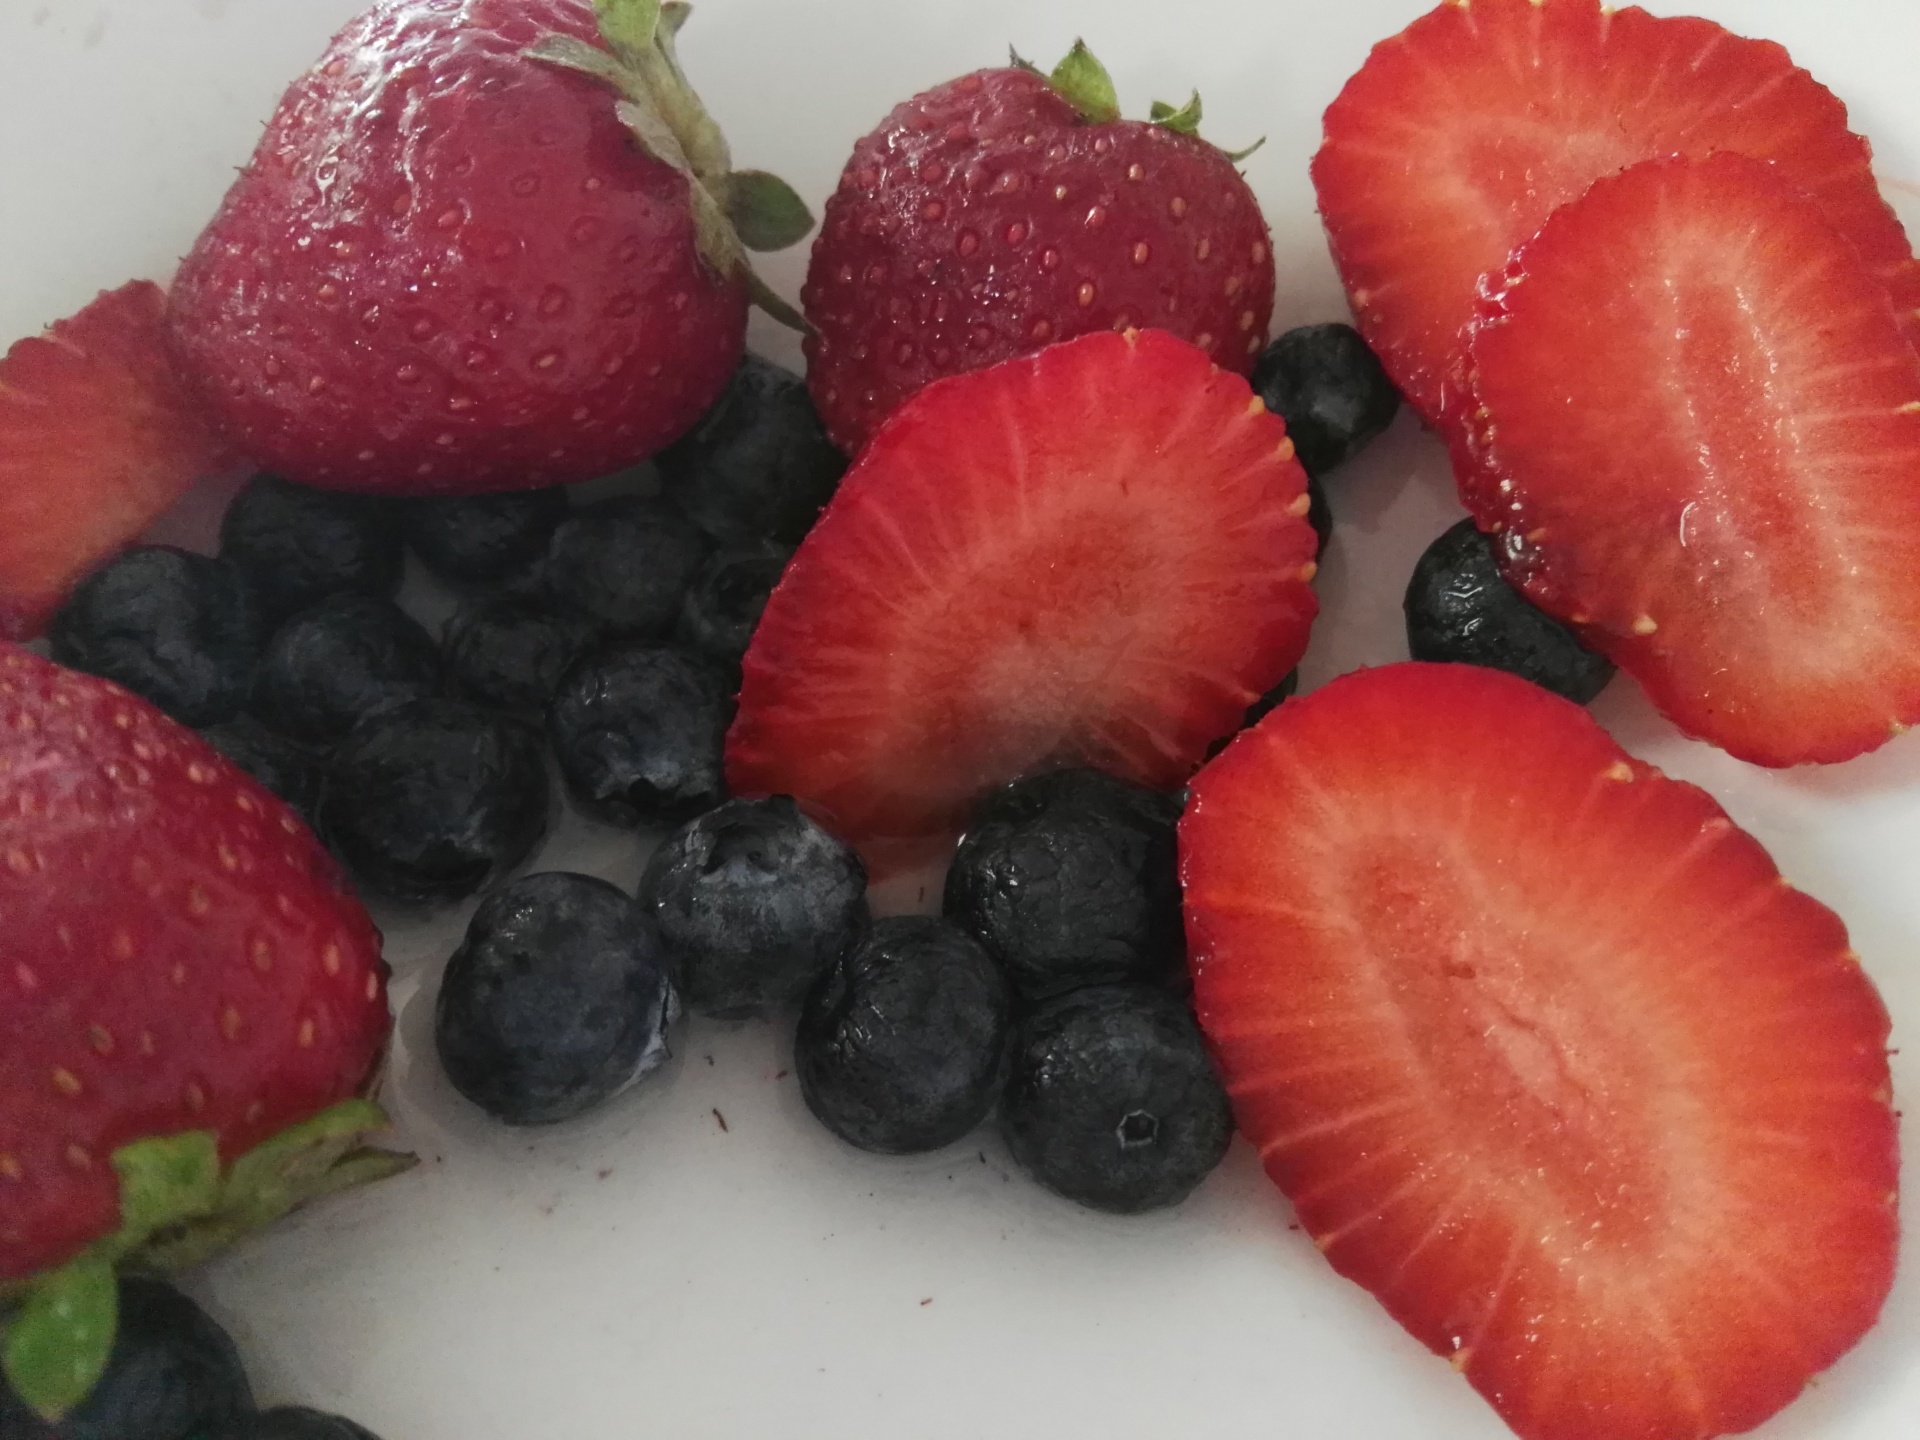 Strawberries and blueberries a